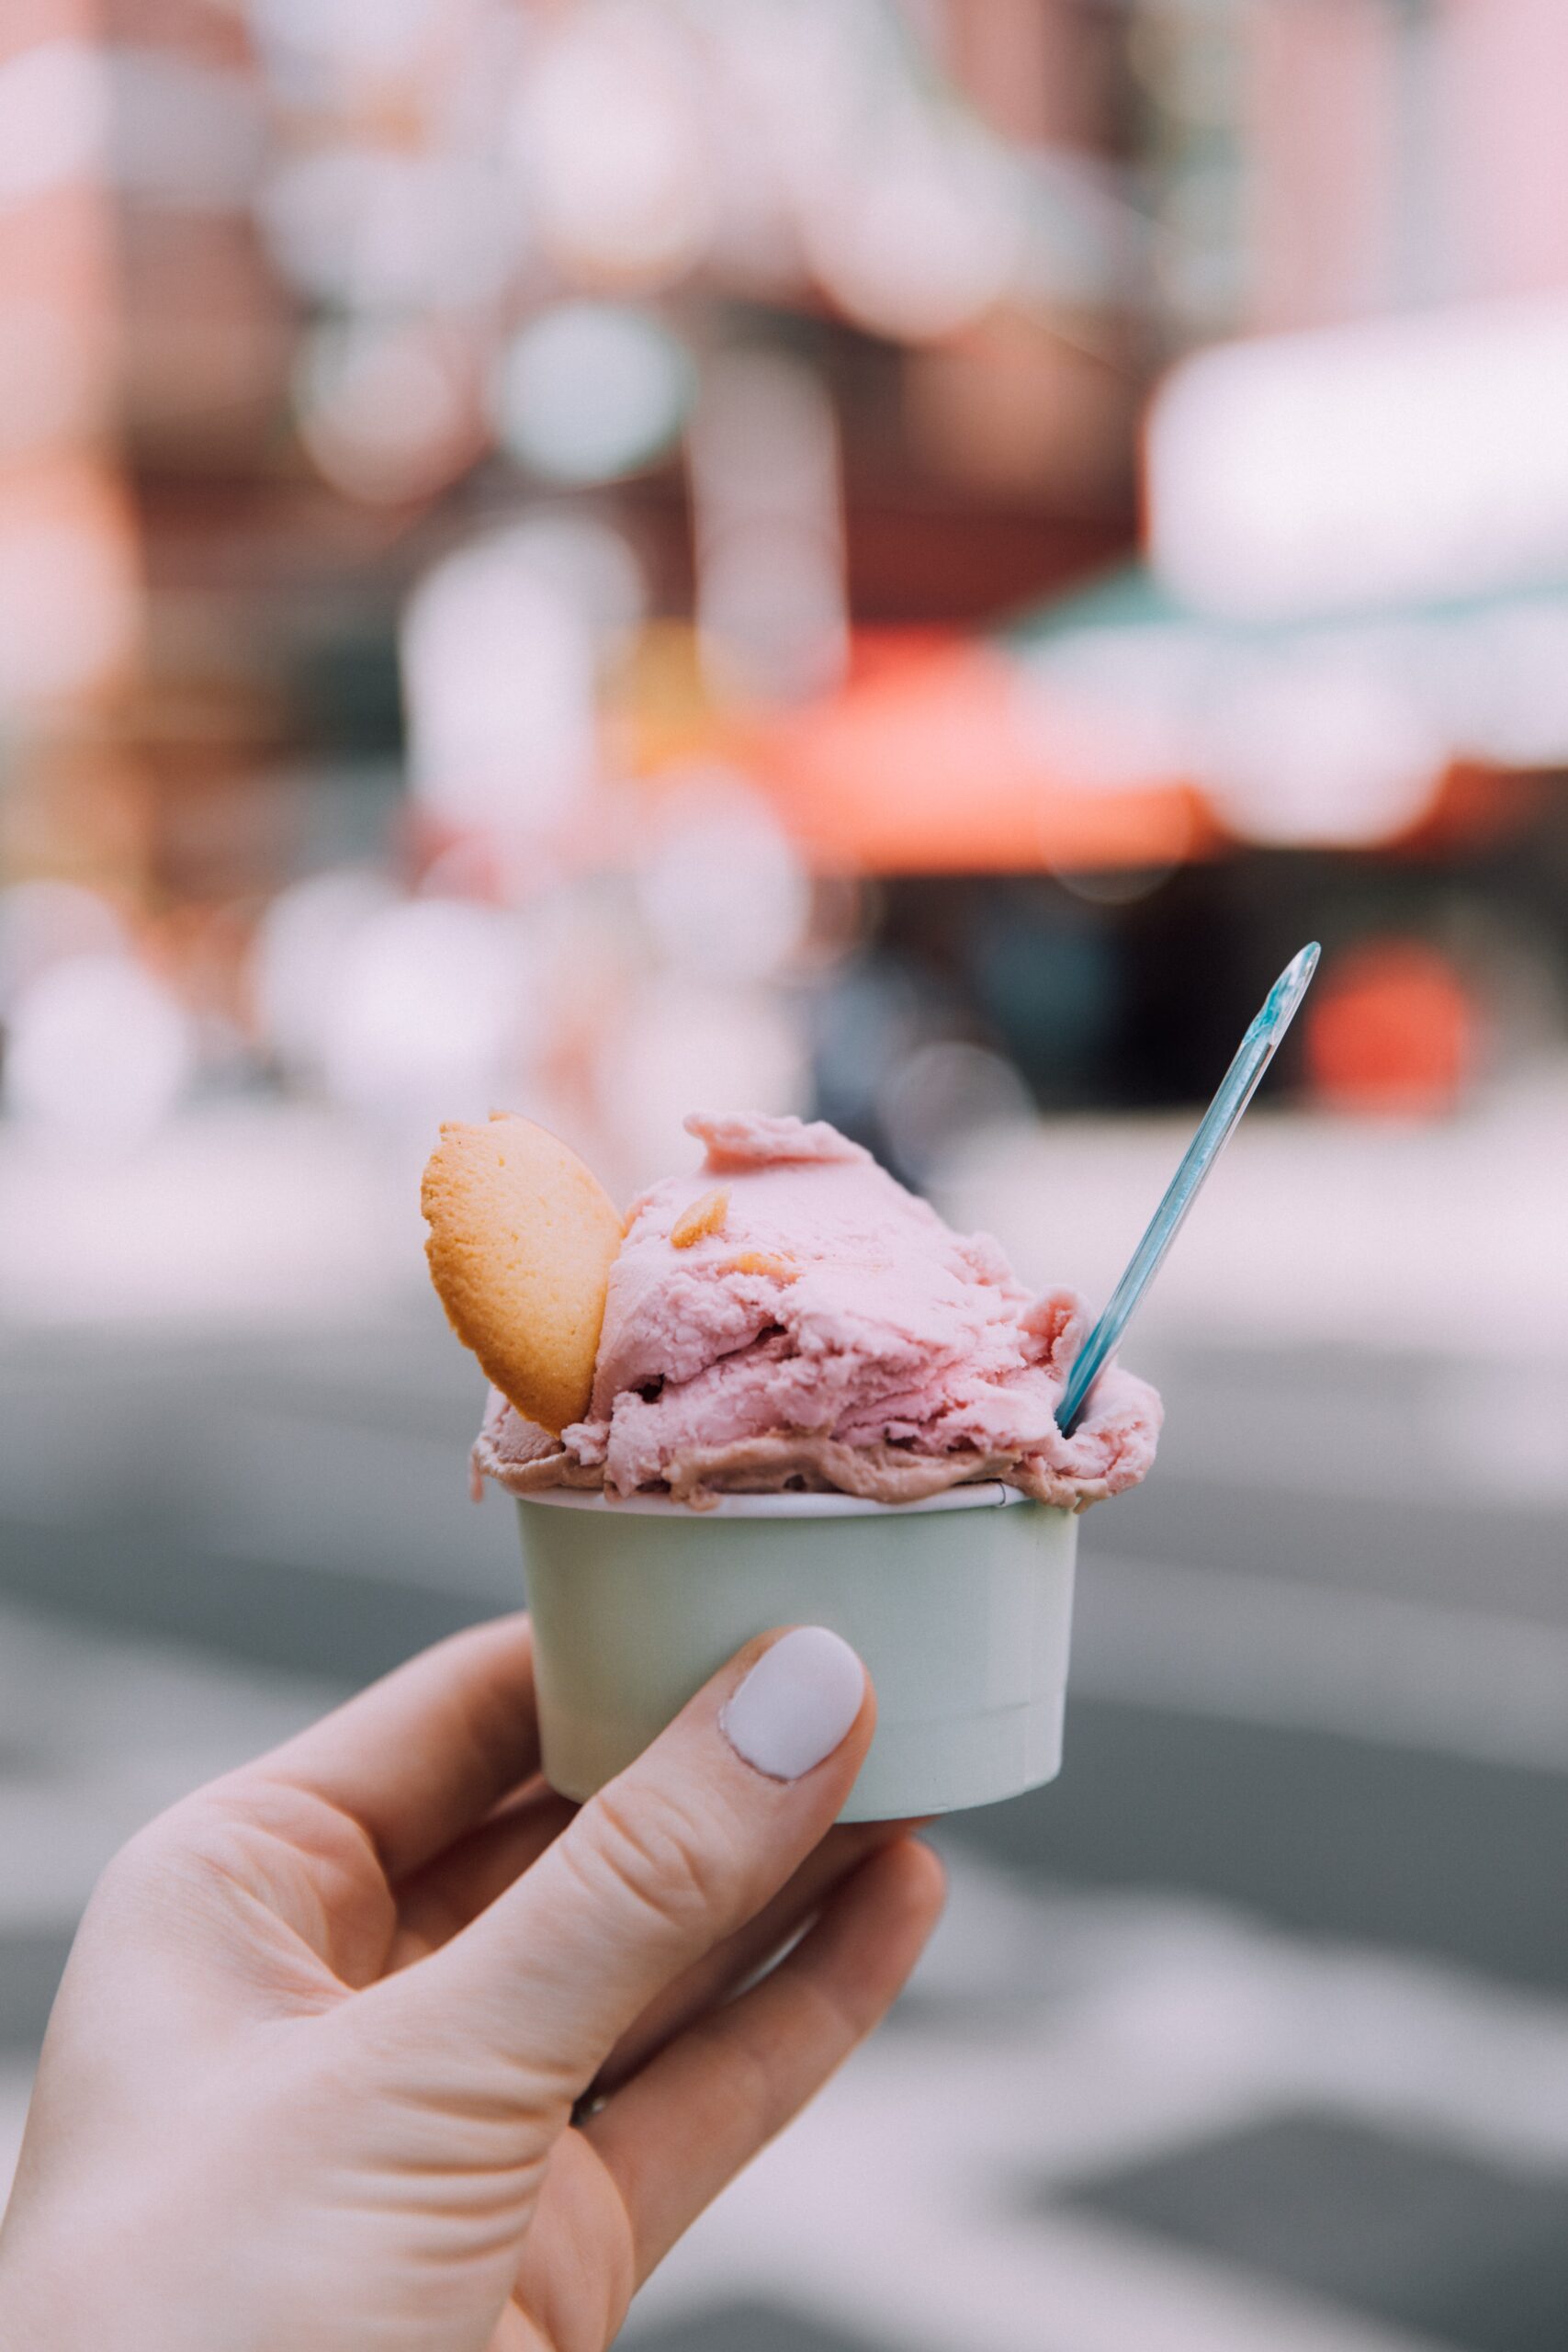 Learn more about NYC Ice Cream